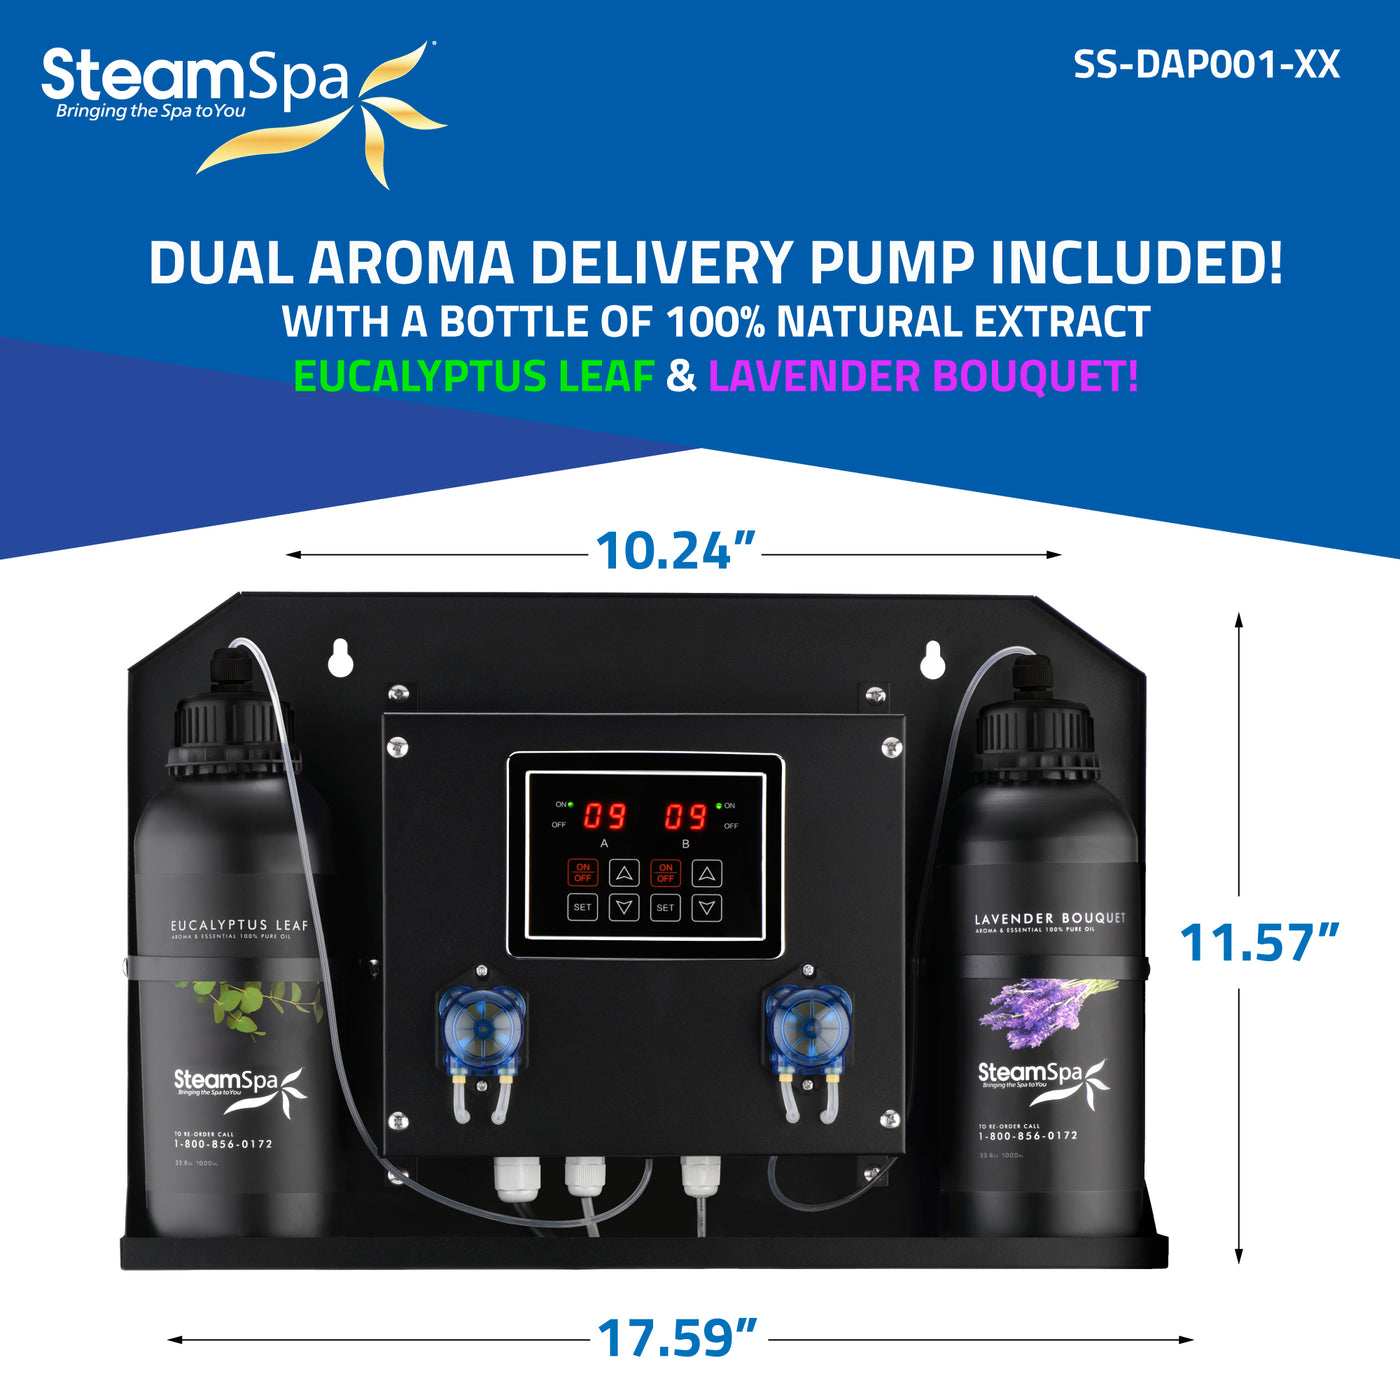 Black Series WiFi and Bluetooth 9kW QuickStart Steam Bath Generator Package with Dual Aroma Pump in Brushed Nickel BKT900BN-ADP